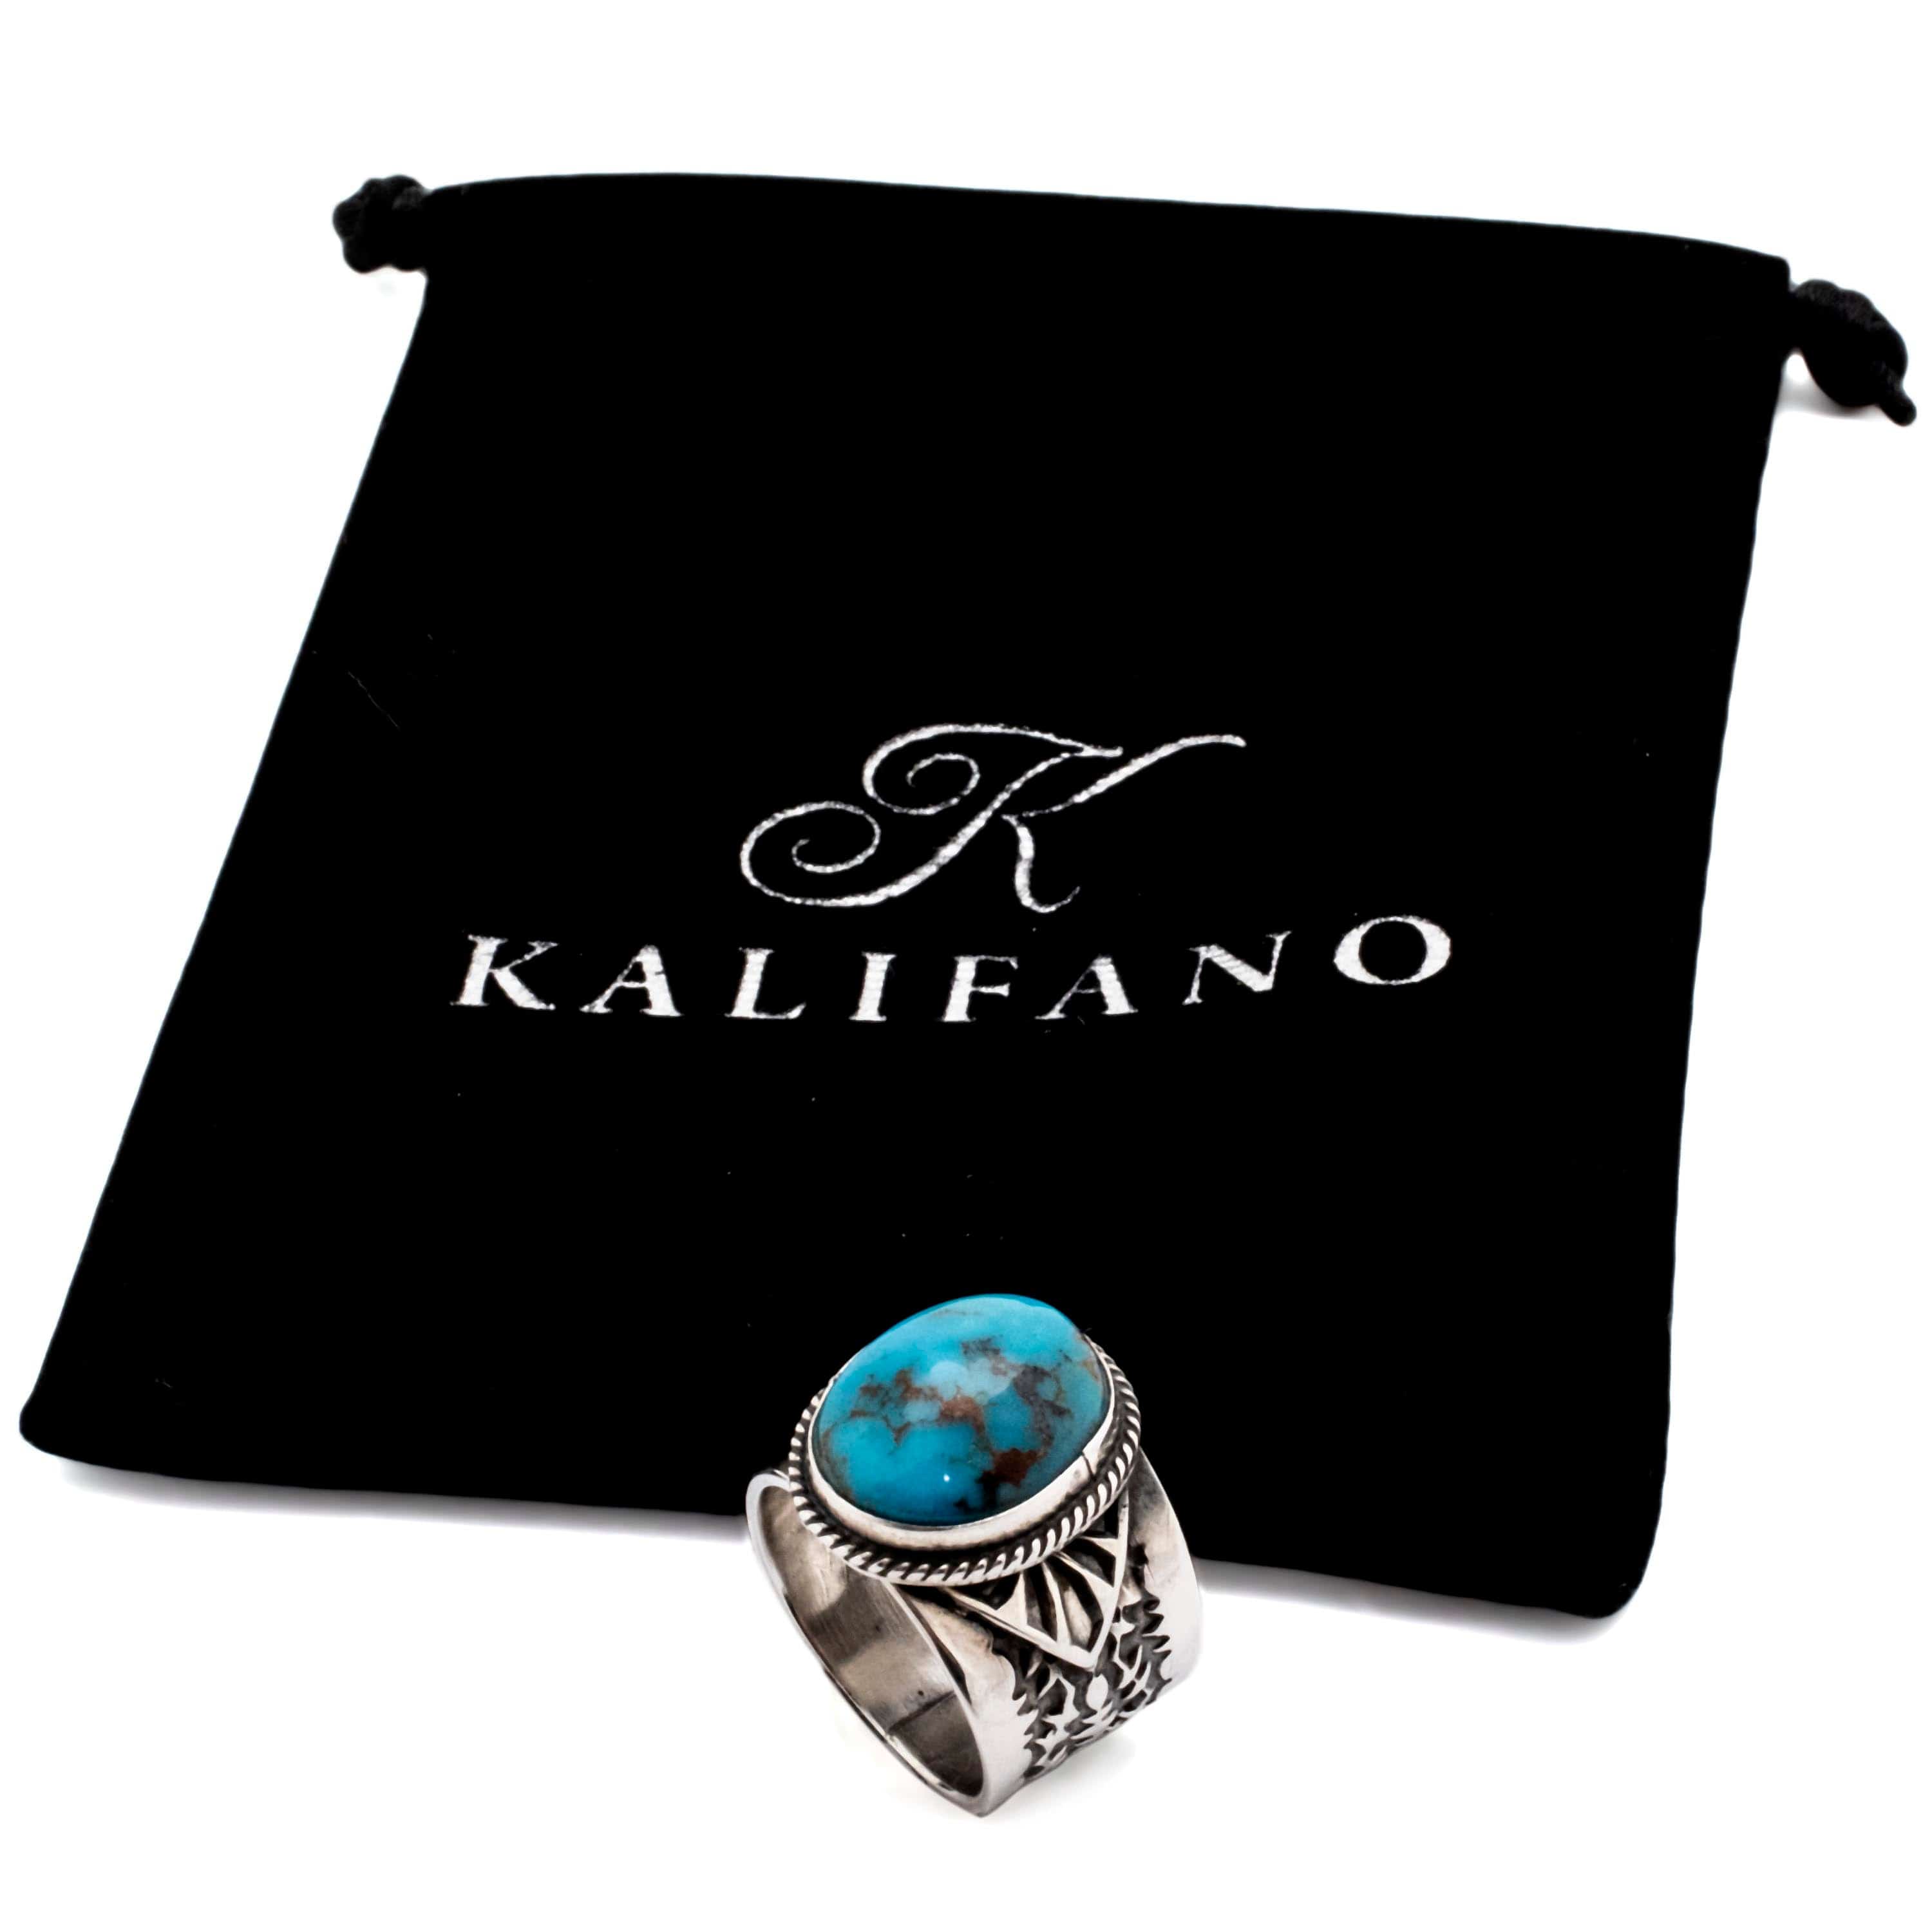 Kalifano Native American Jewelry 11 Sunshine Reeves Eygptian Turquoise USA Native American Made 925 Sterling Silver Ring NAR1400.013.11